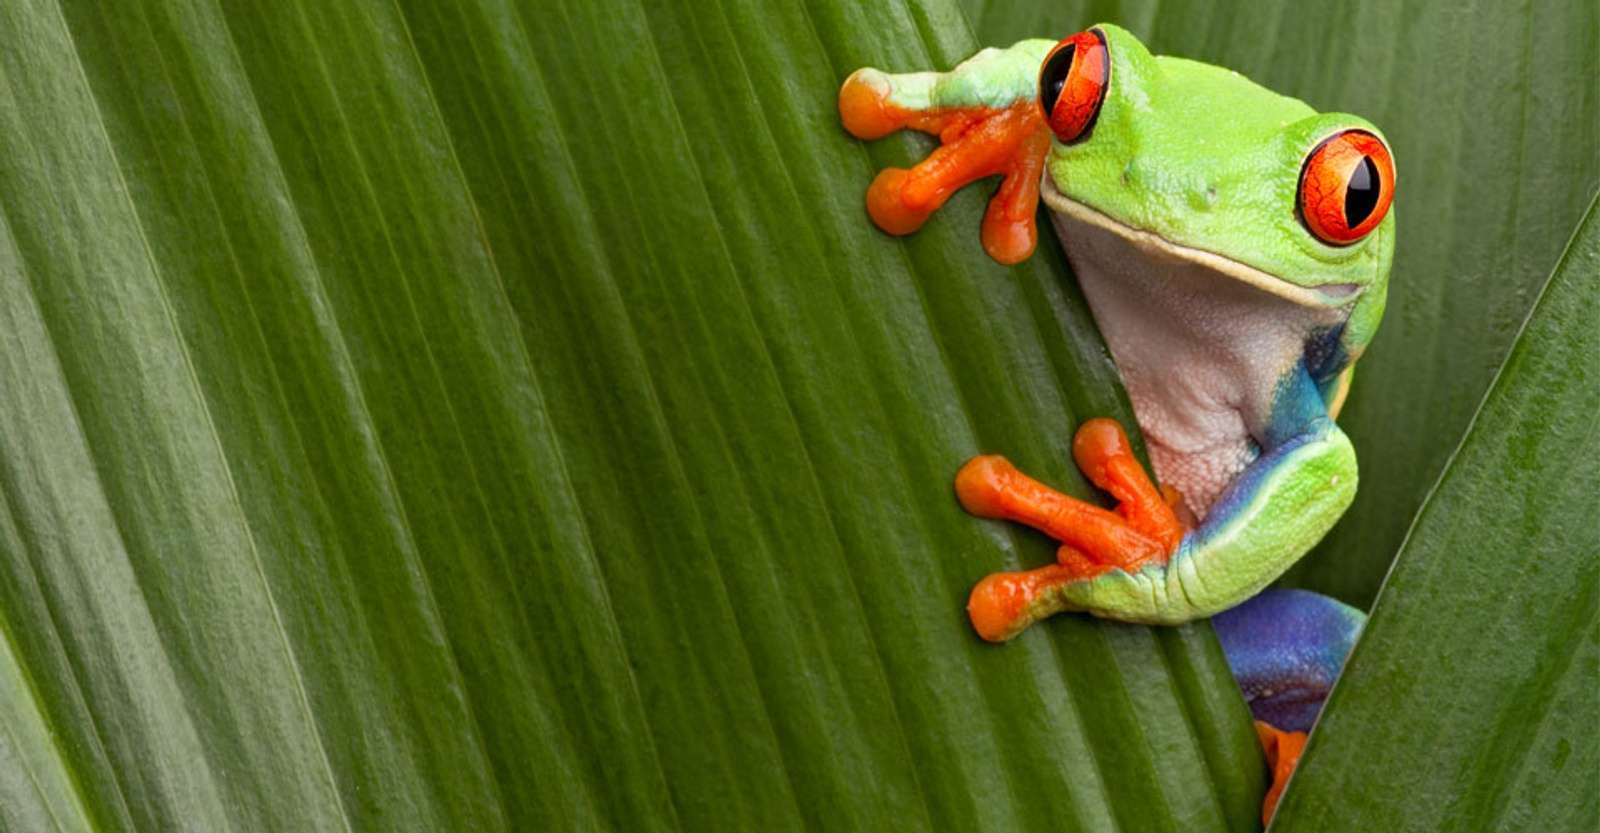 Red-eyed tree frog, Tortuguero National Park, Costa Rica.